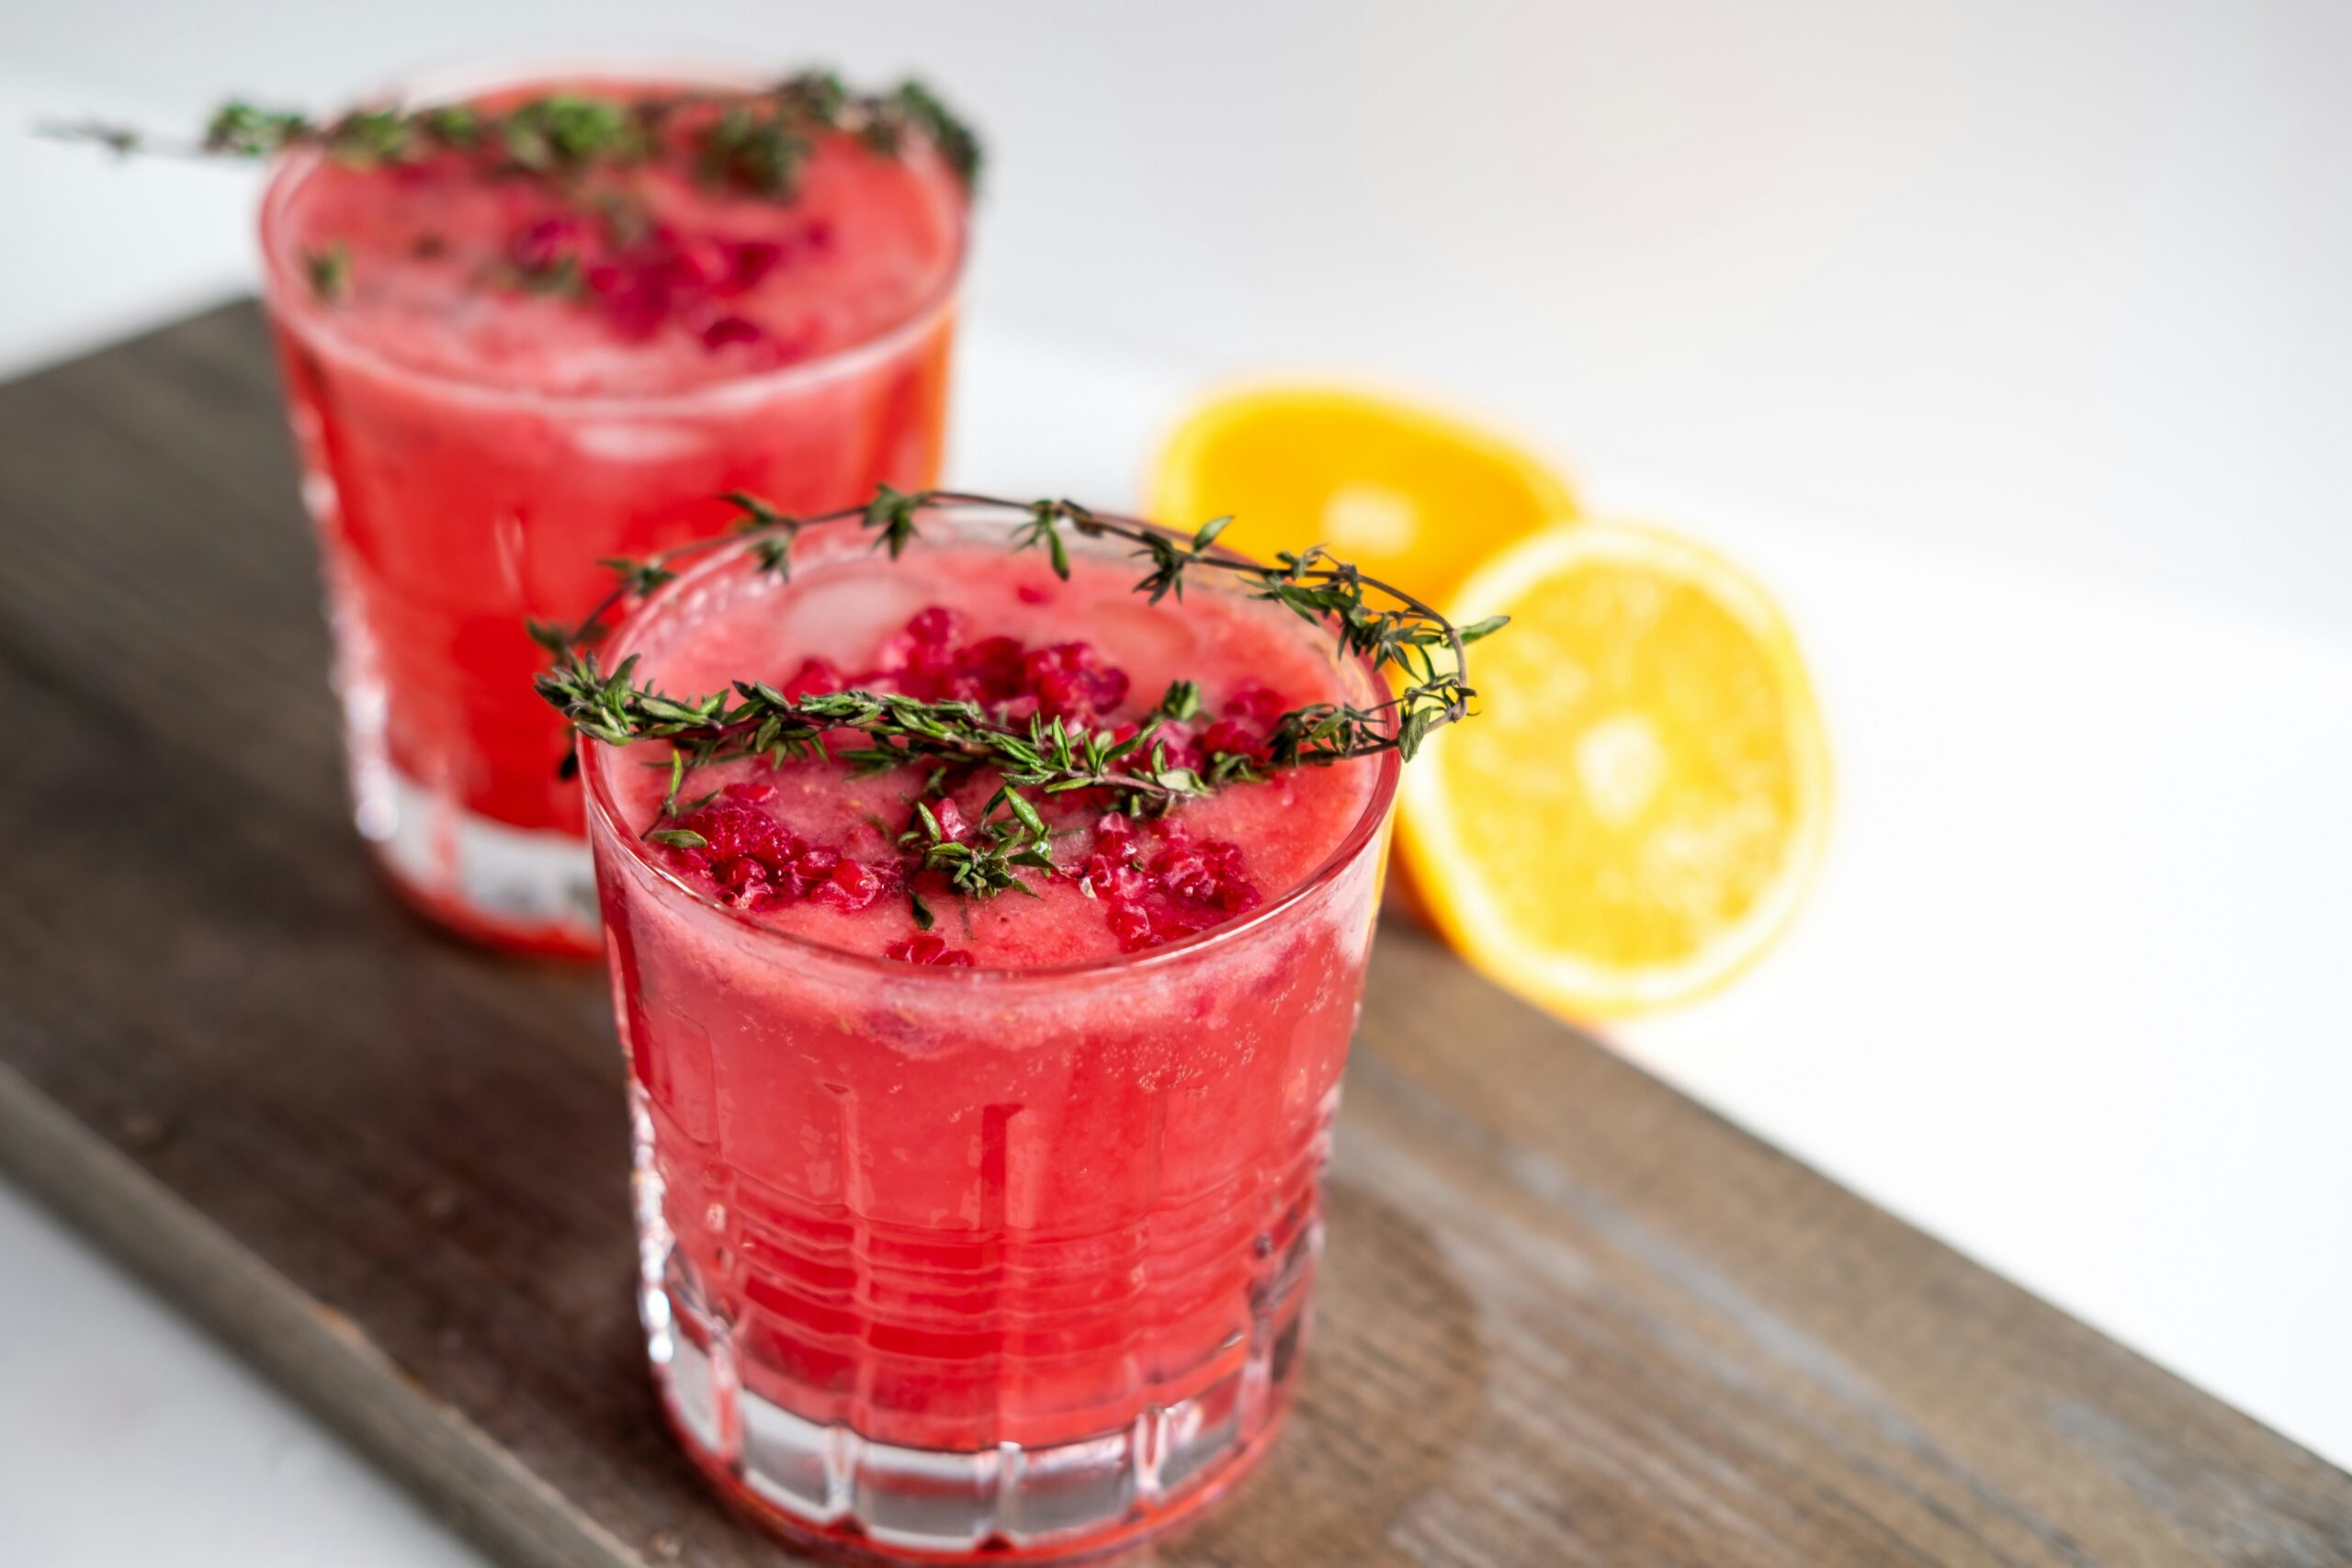 What mixes well with tequila? Try this pomegranate martini. Pictured: Pomegranate drink